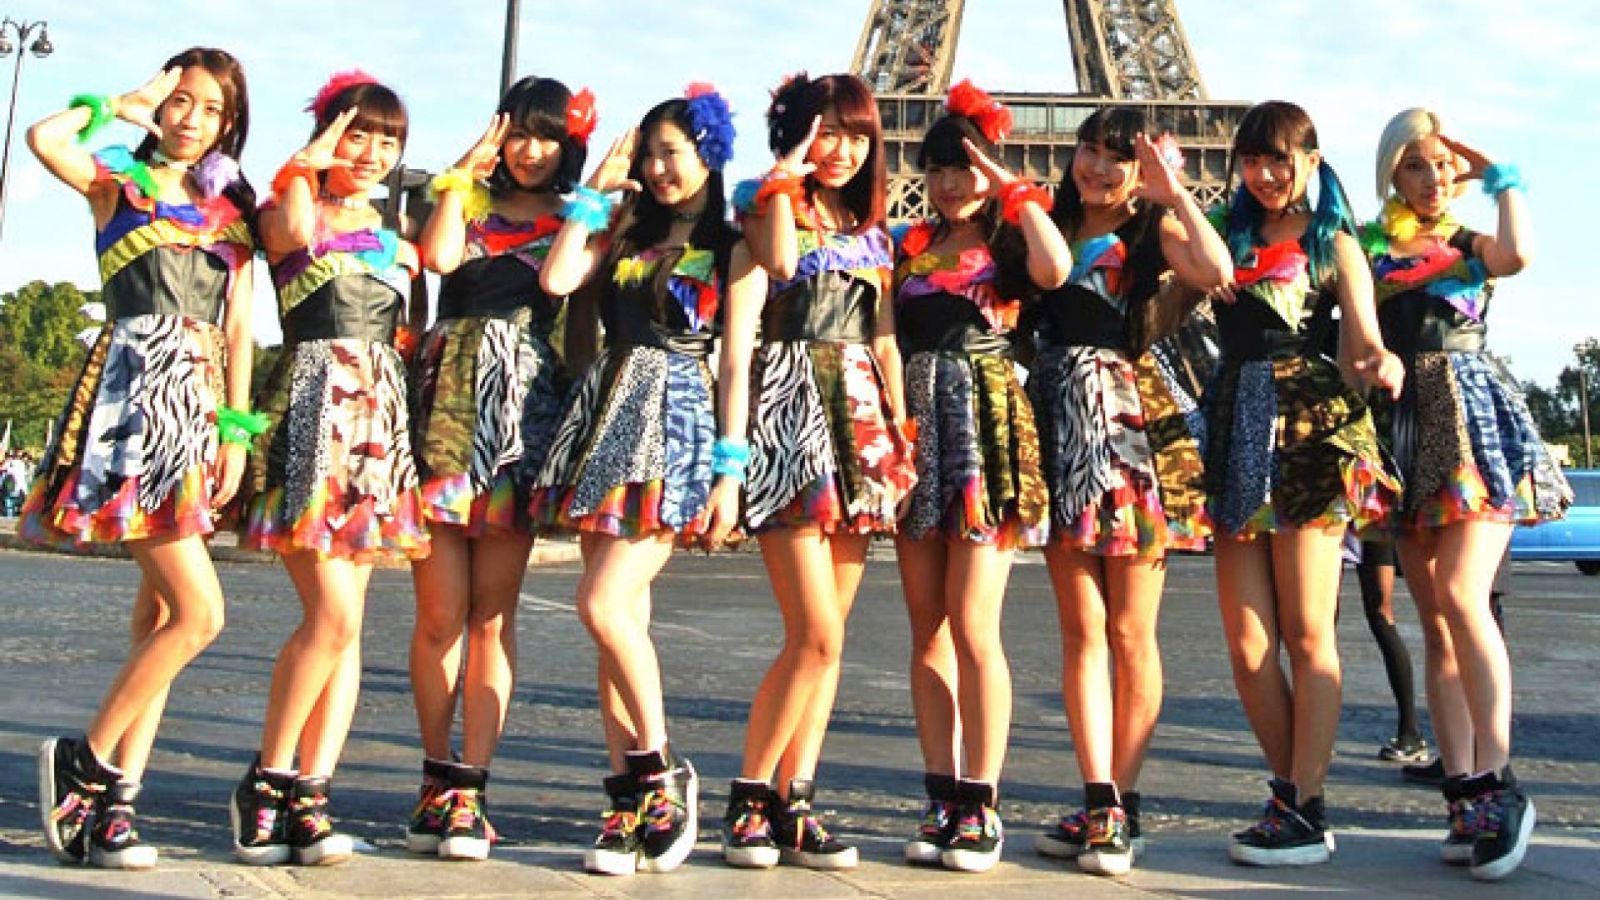 Interview mit Cheeky Parade © Cheeky Parade. All rights reserved.